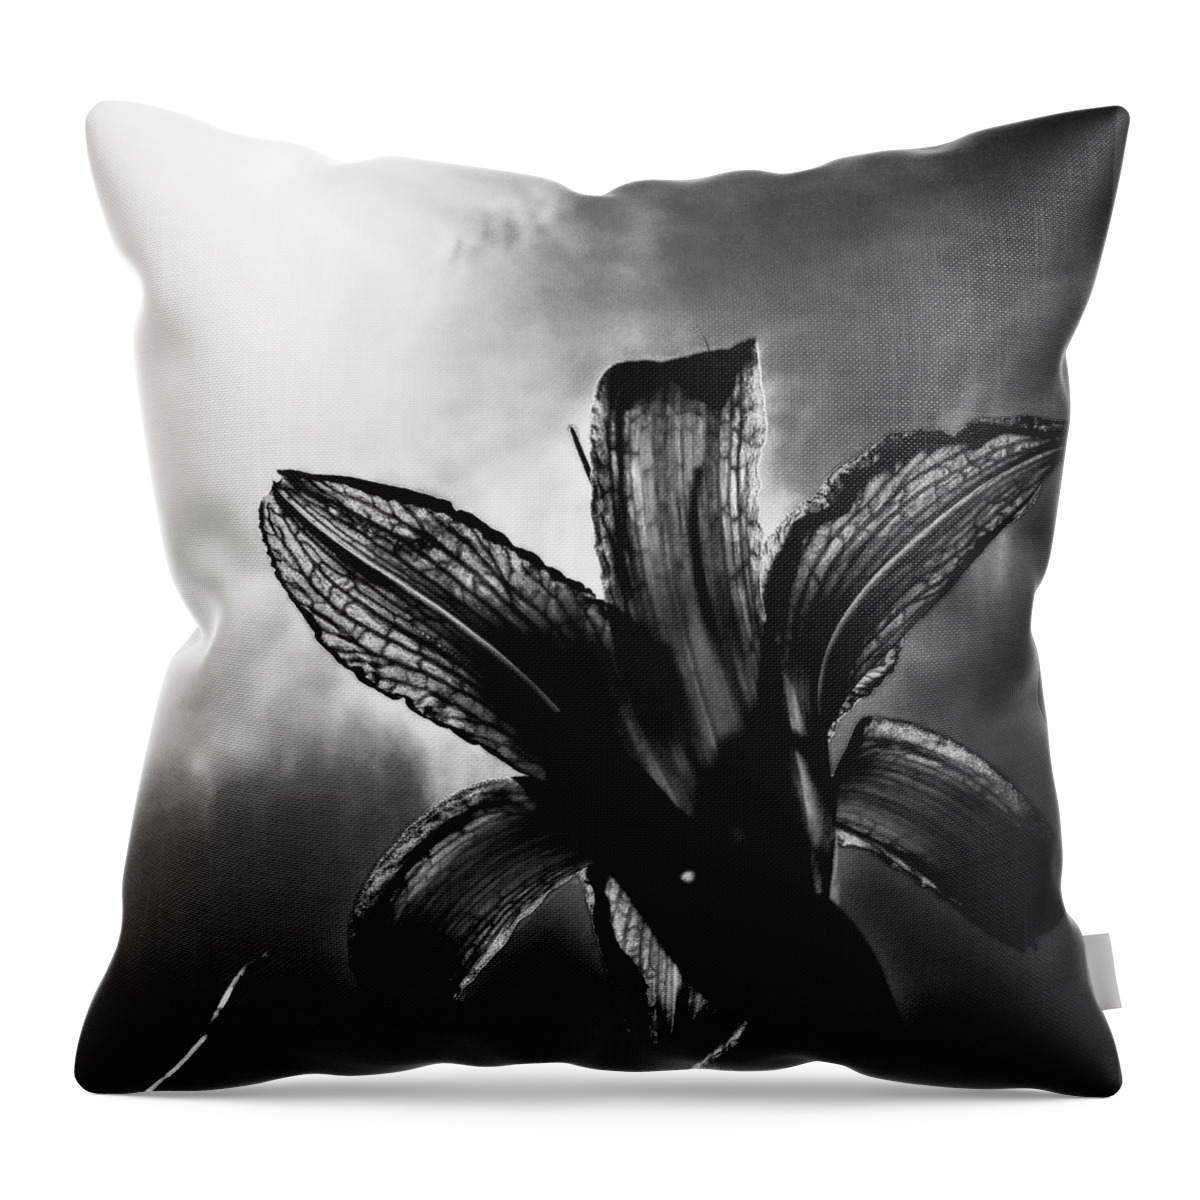 Daylily Silhouette Throw Pillow featuring the digital art Looking Up by Pamela Smale Williams